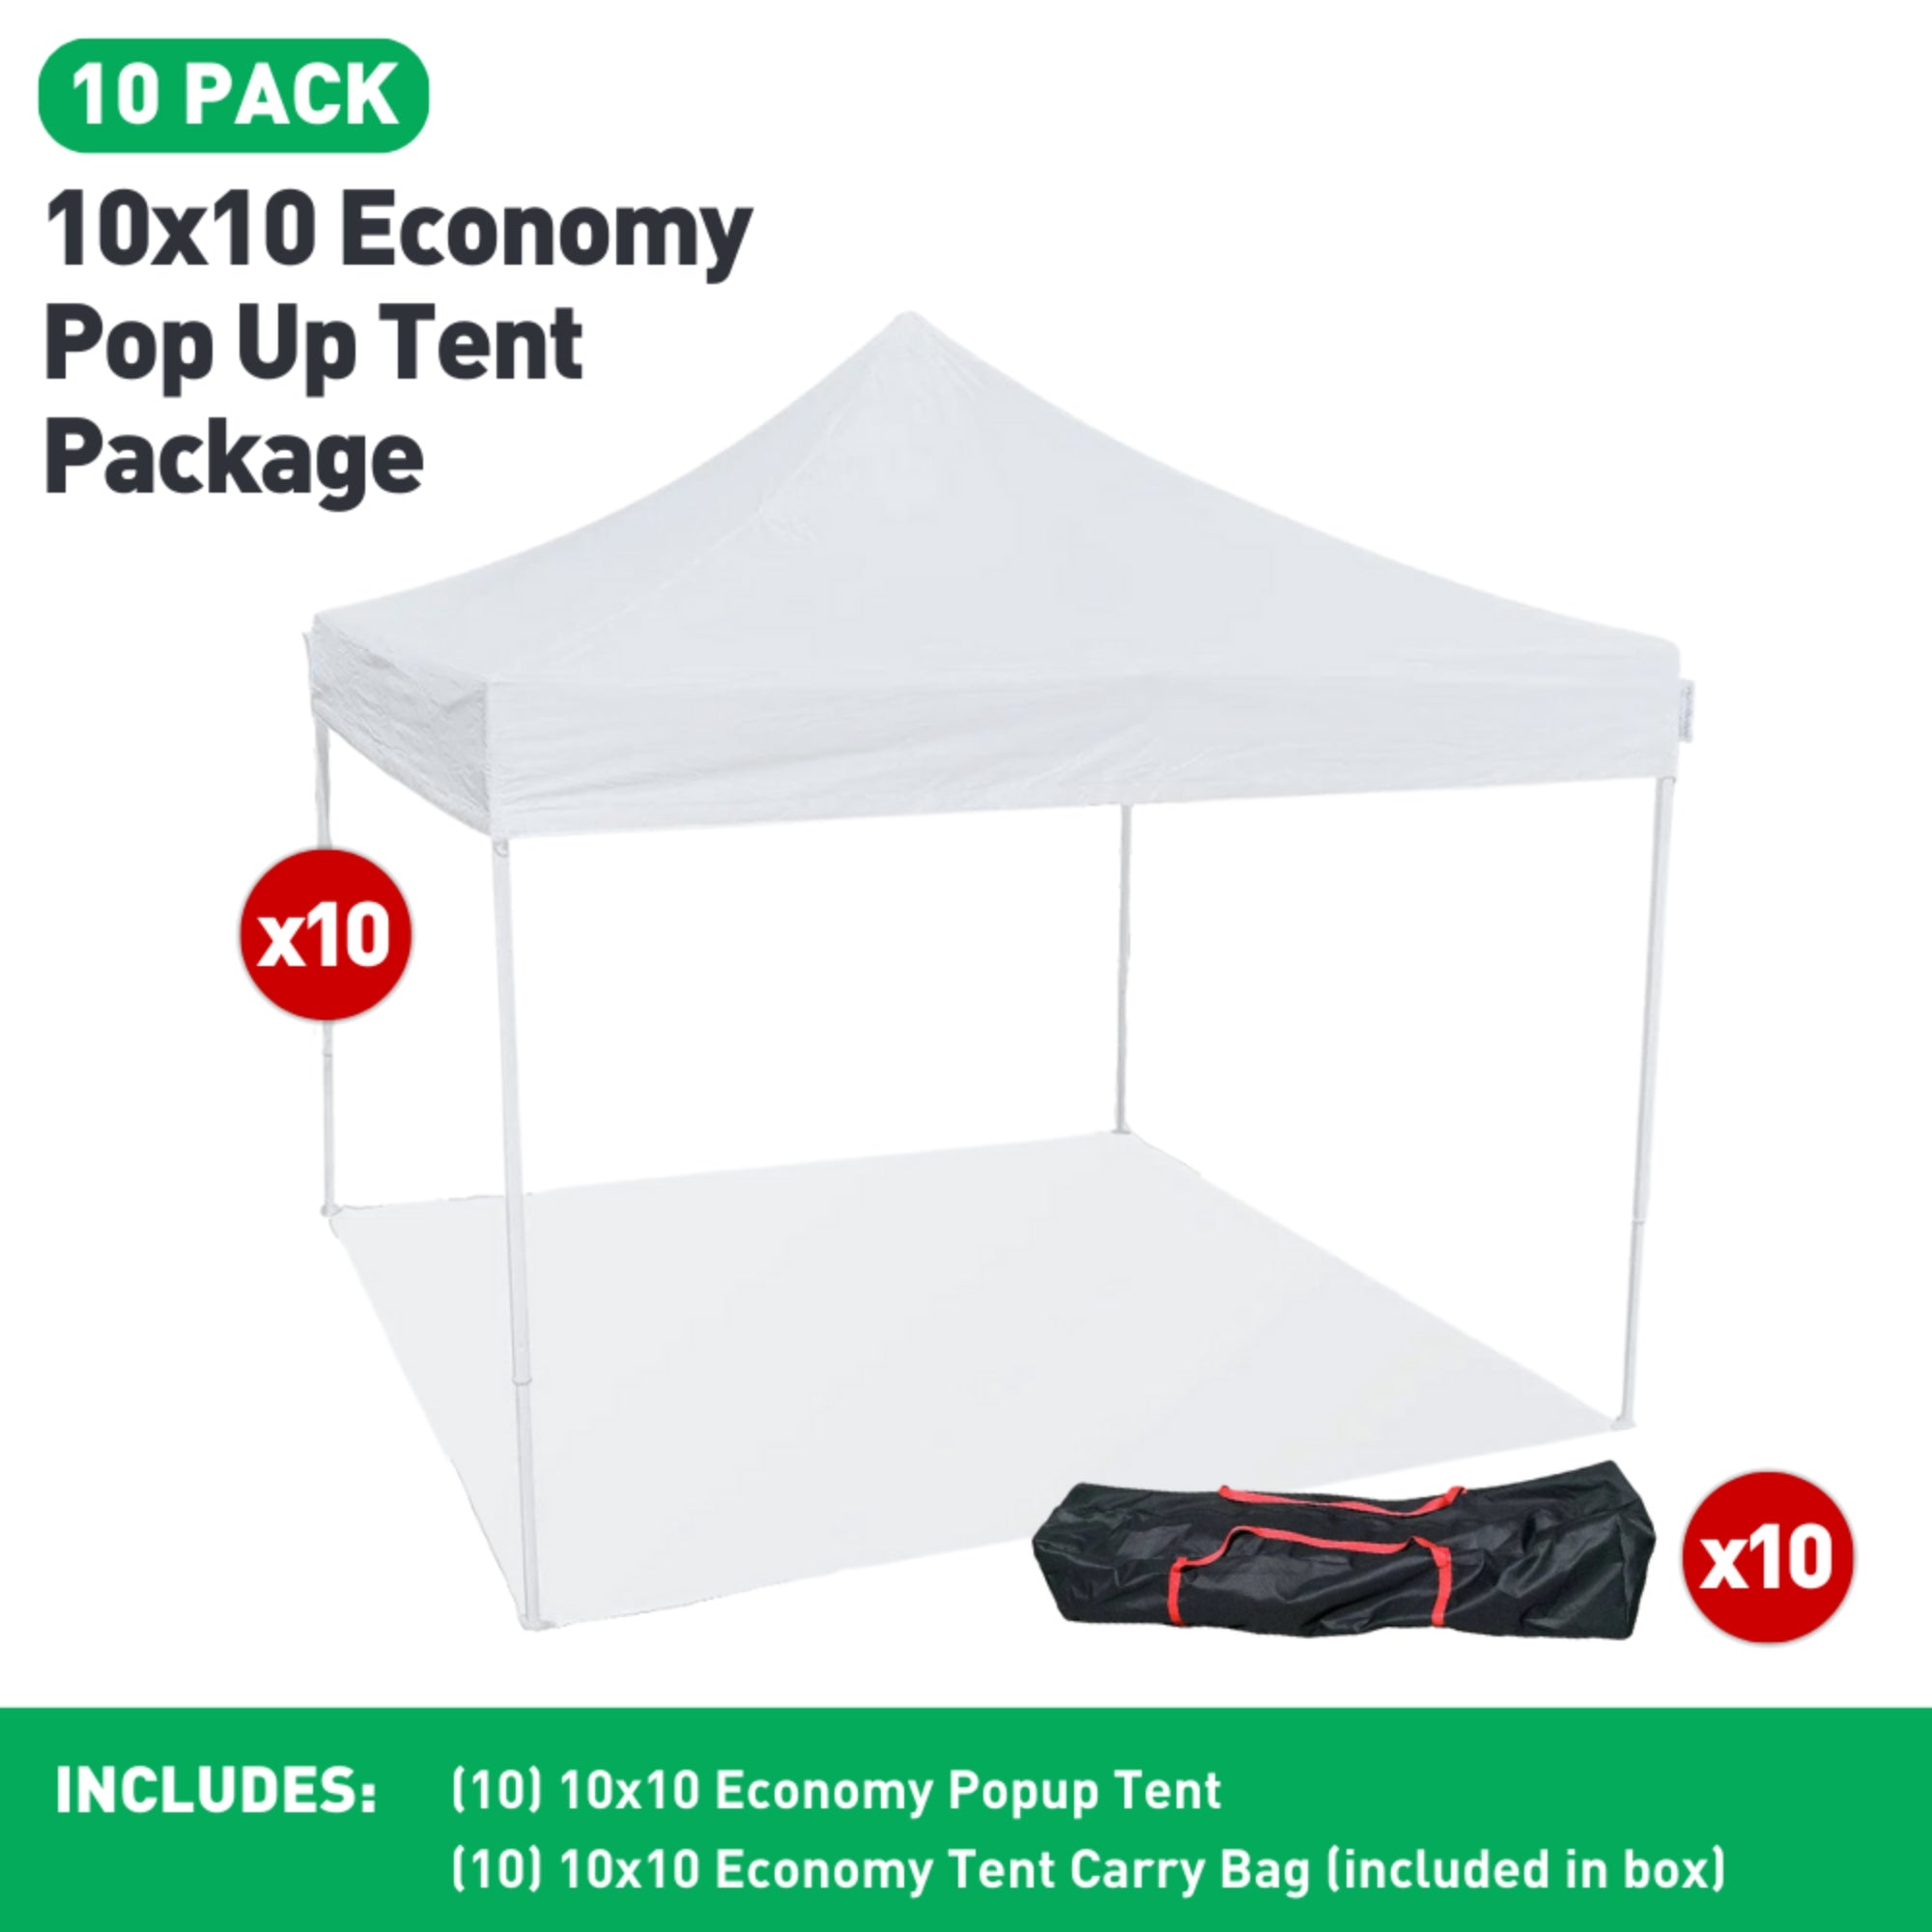 Economy Pop Up Tent Package Deal - 10 Pack - HullaBalloo Sales